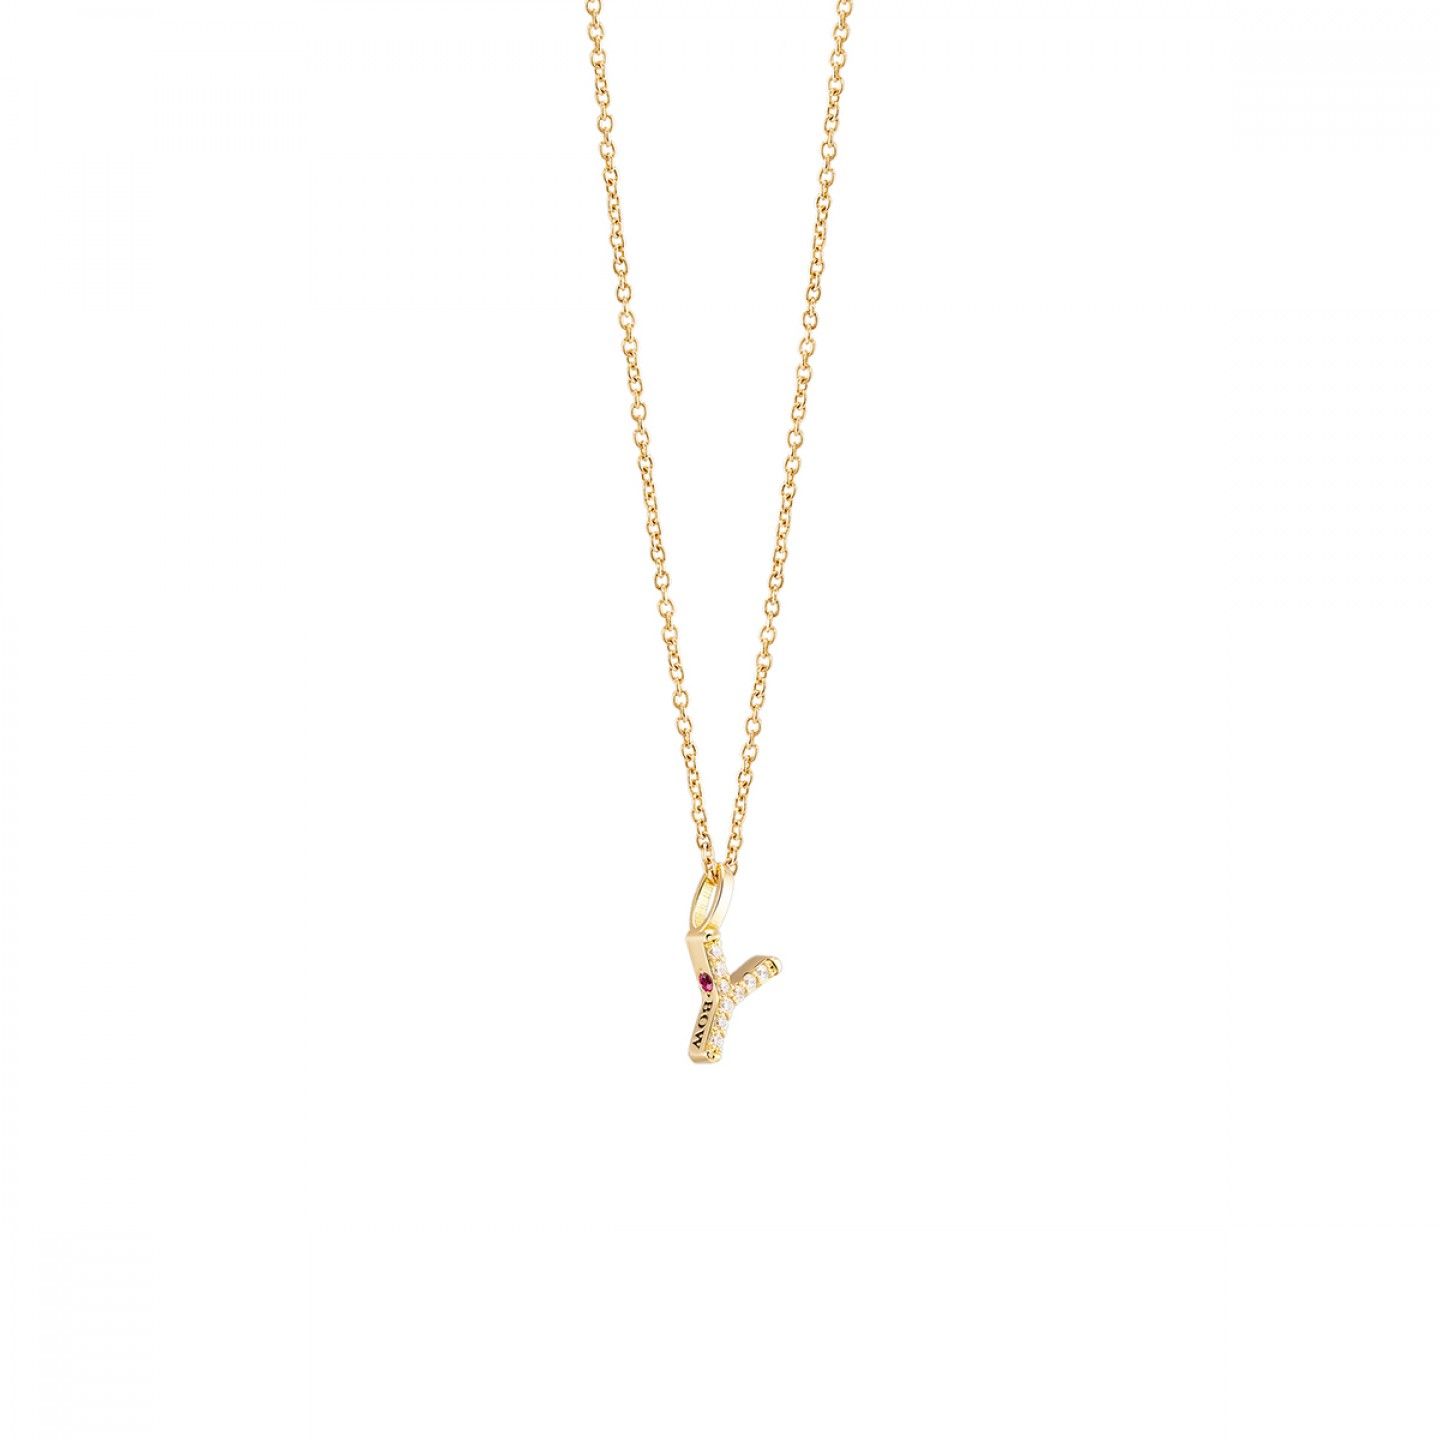 PENDENTE BOW GOLD - LETTER Y